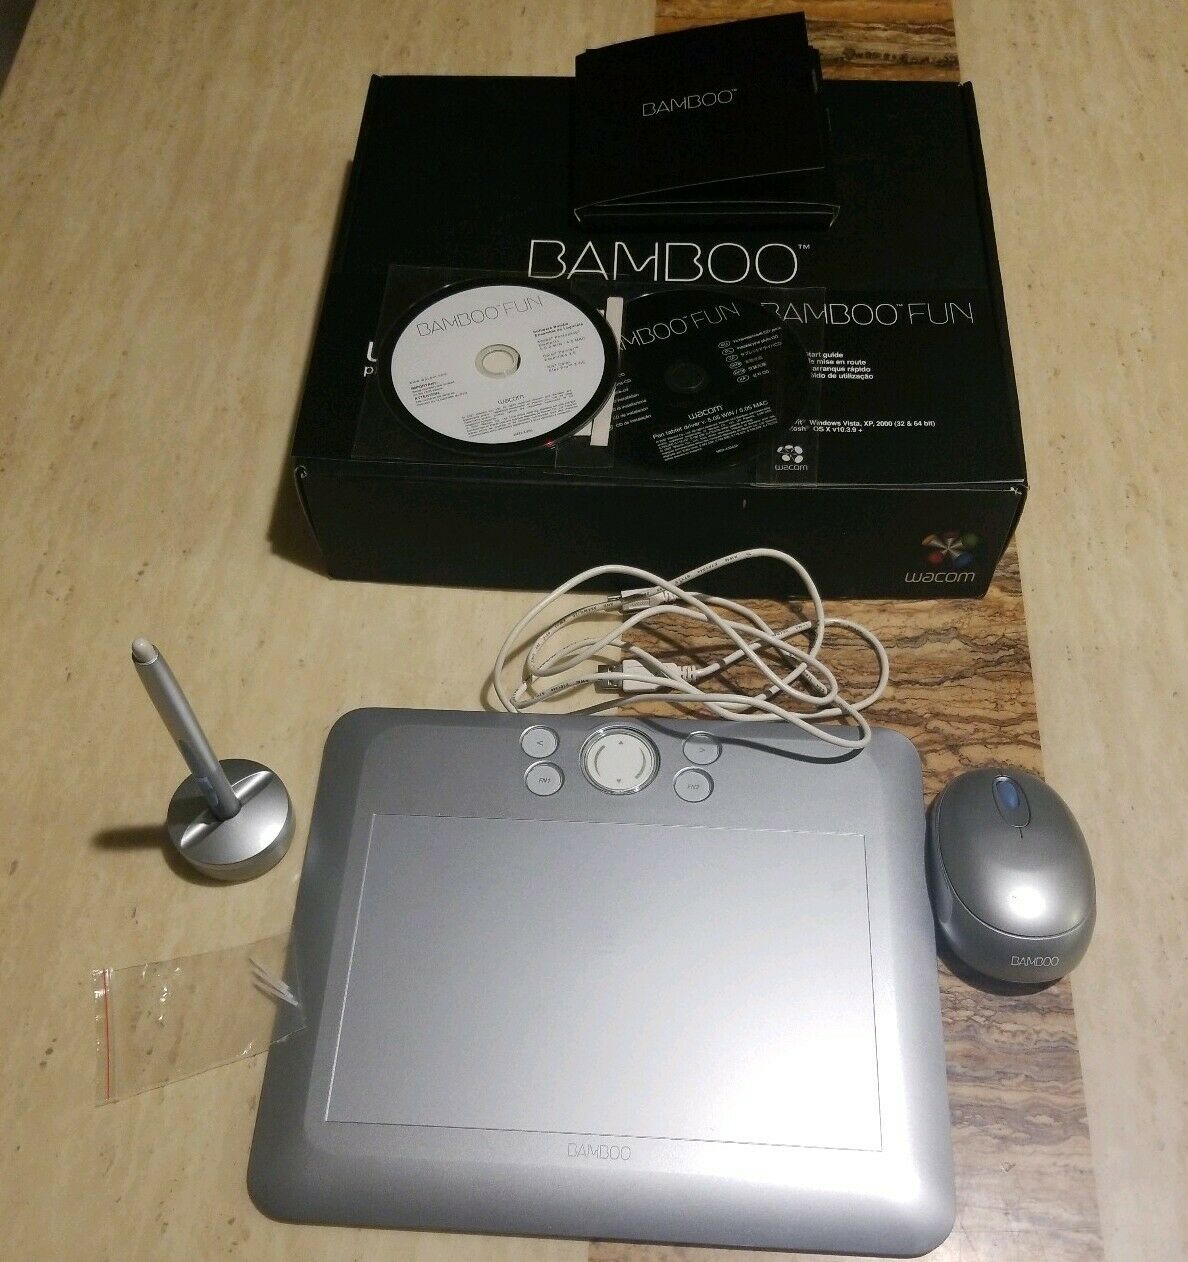 WACOM Bamboo Tablet Fun Mouse, Digitizer- Graphic Drawing Tablet CTE650.